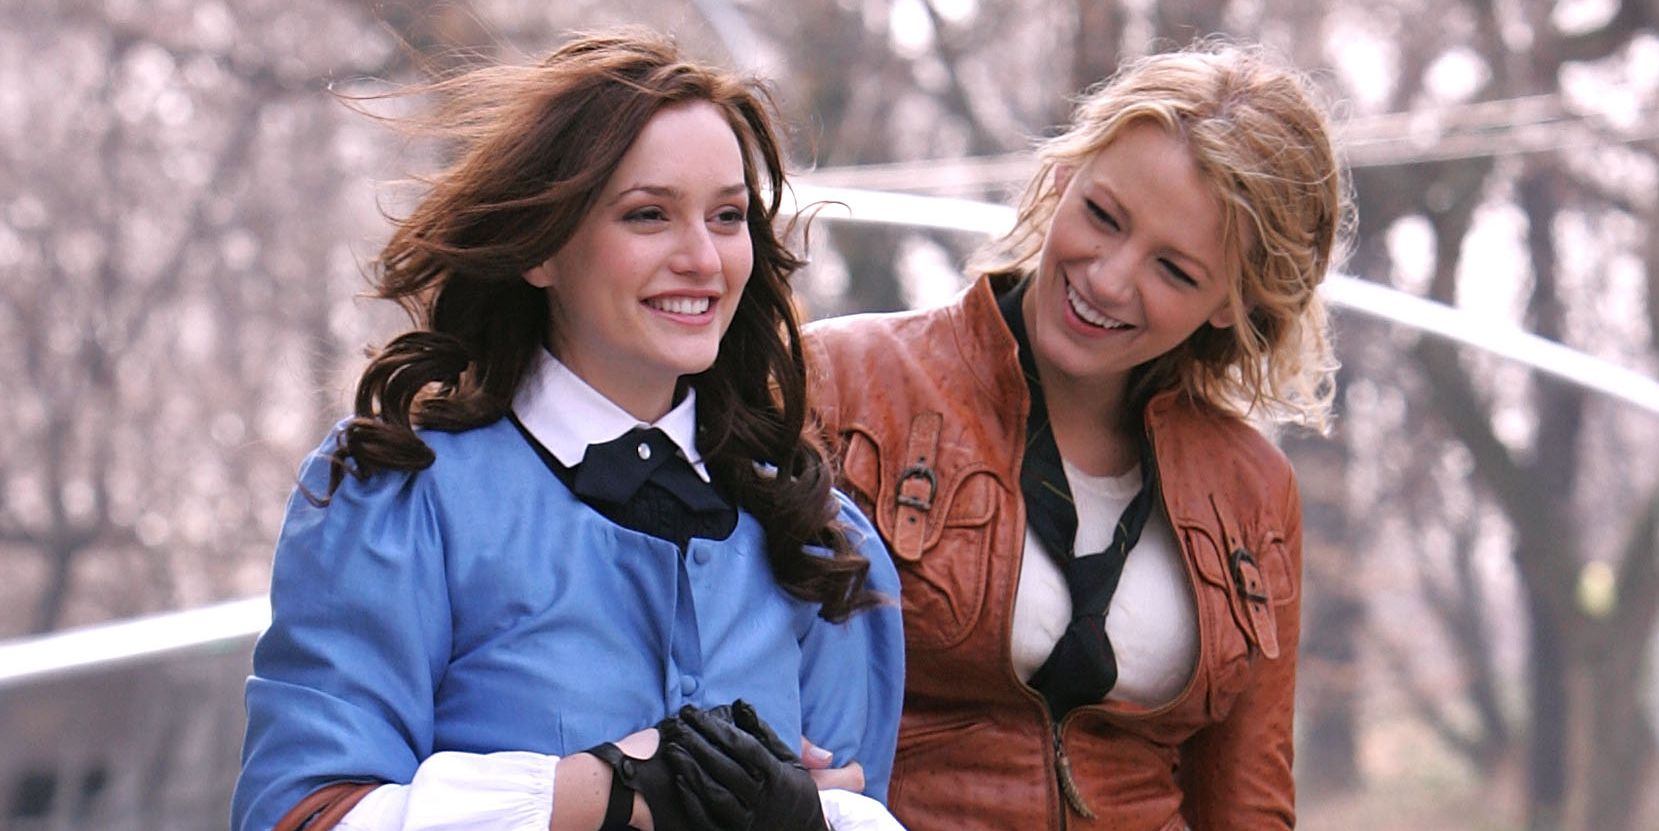 Leighton Meester and Blake Lively